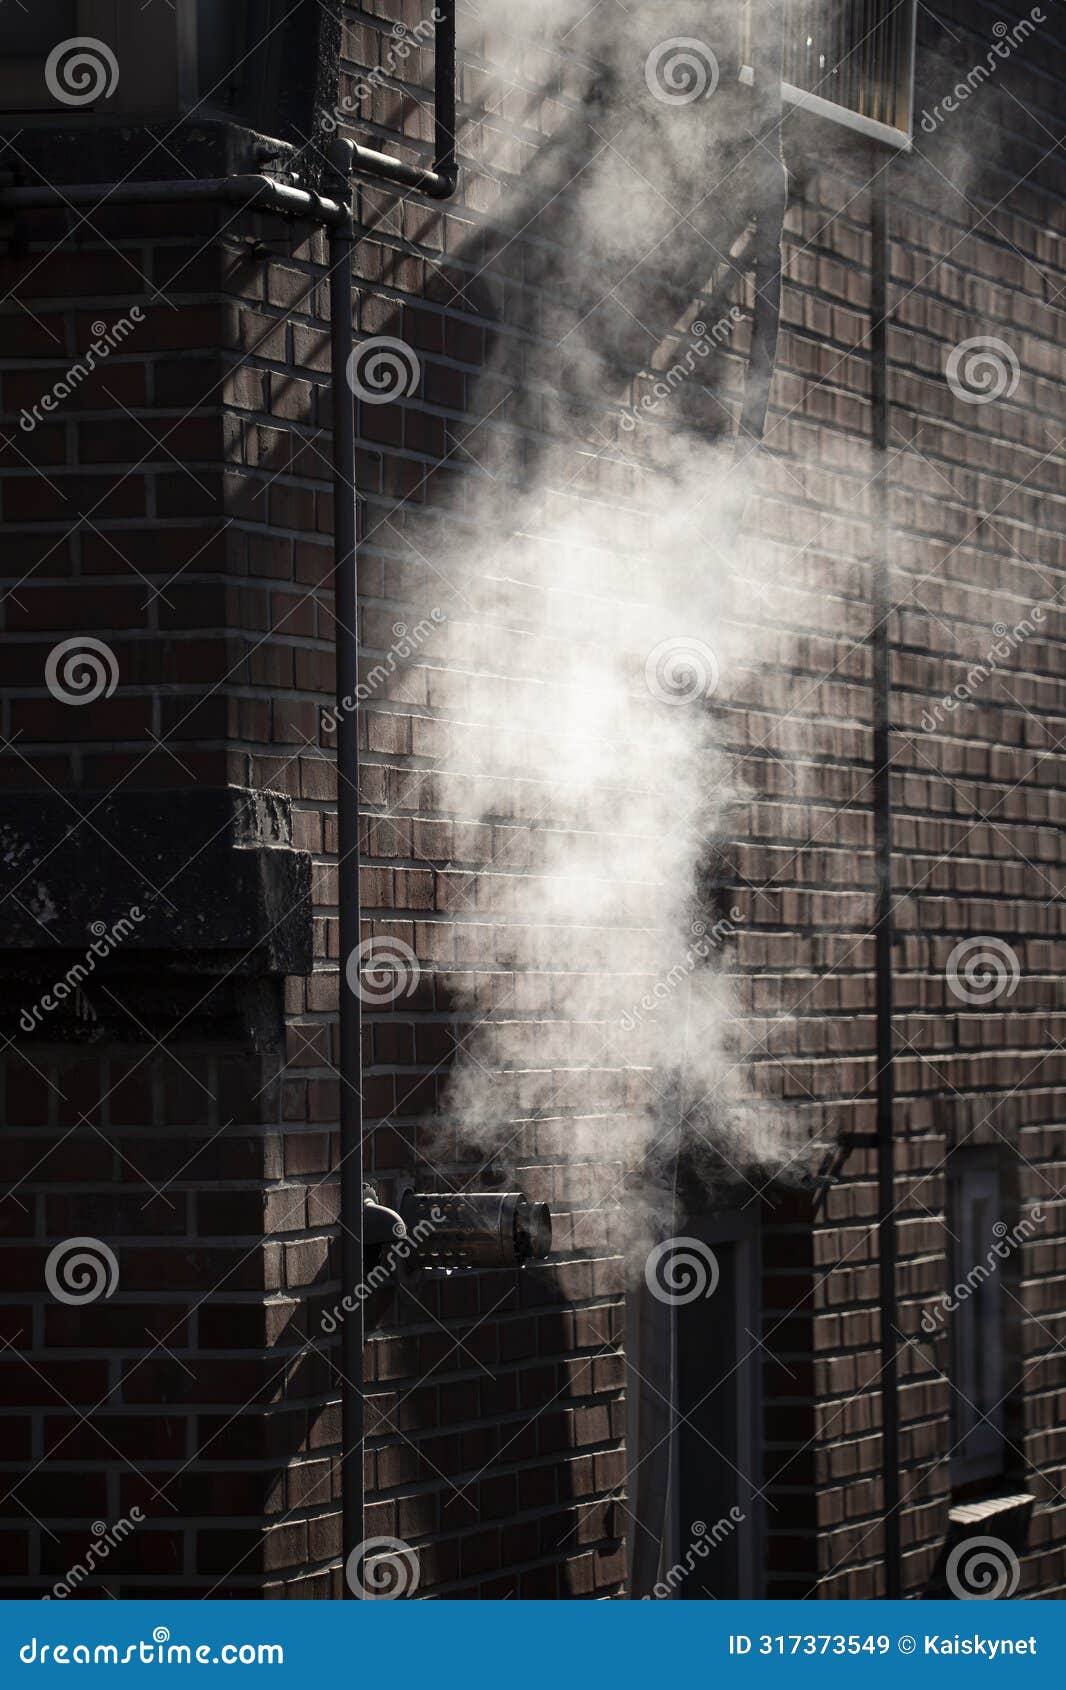 steam coming out of a central heating flue on a house wall in south korea